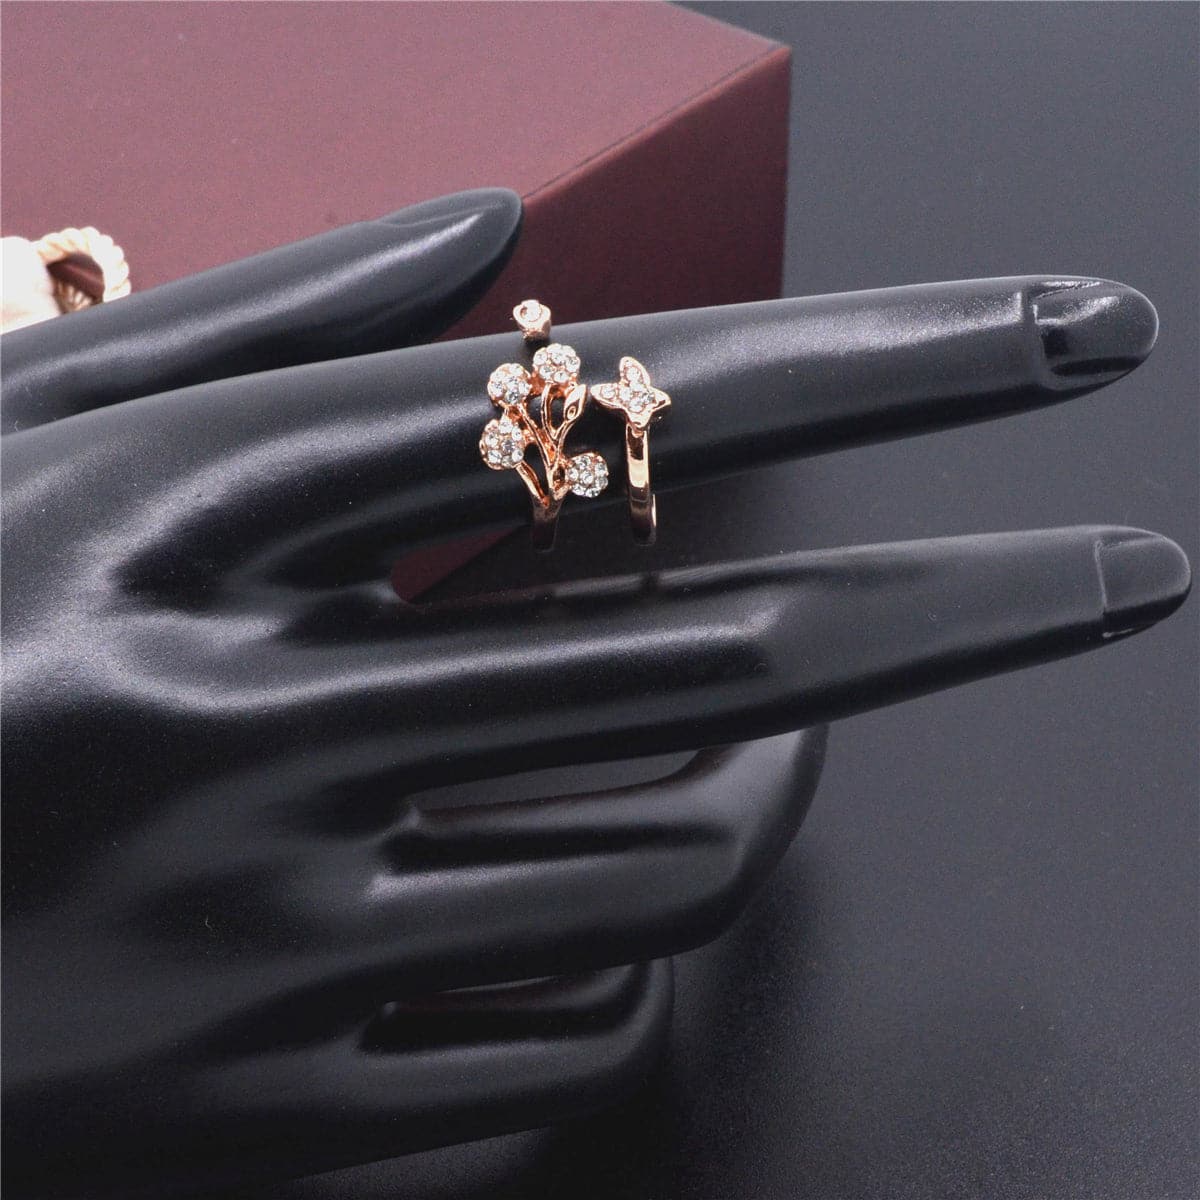 cubic zirconia & 18k Rose Gold-Plated Flower & Butterfly Ring - streetregion